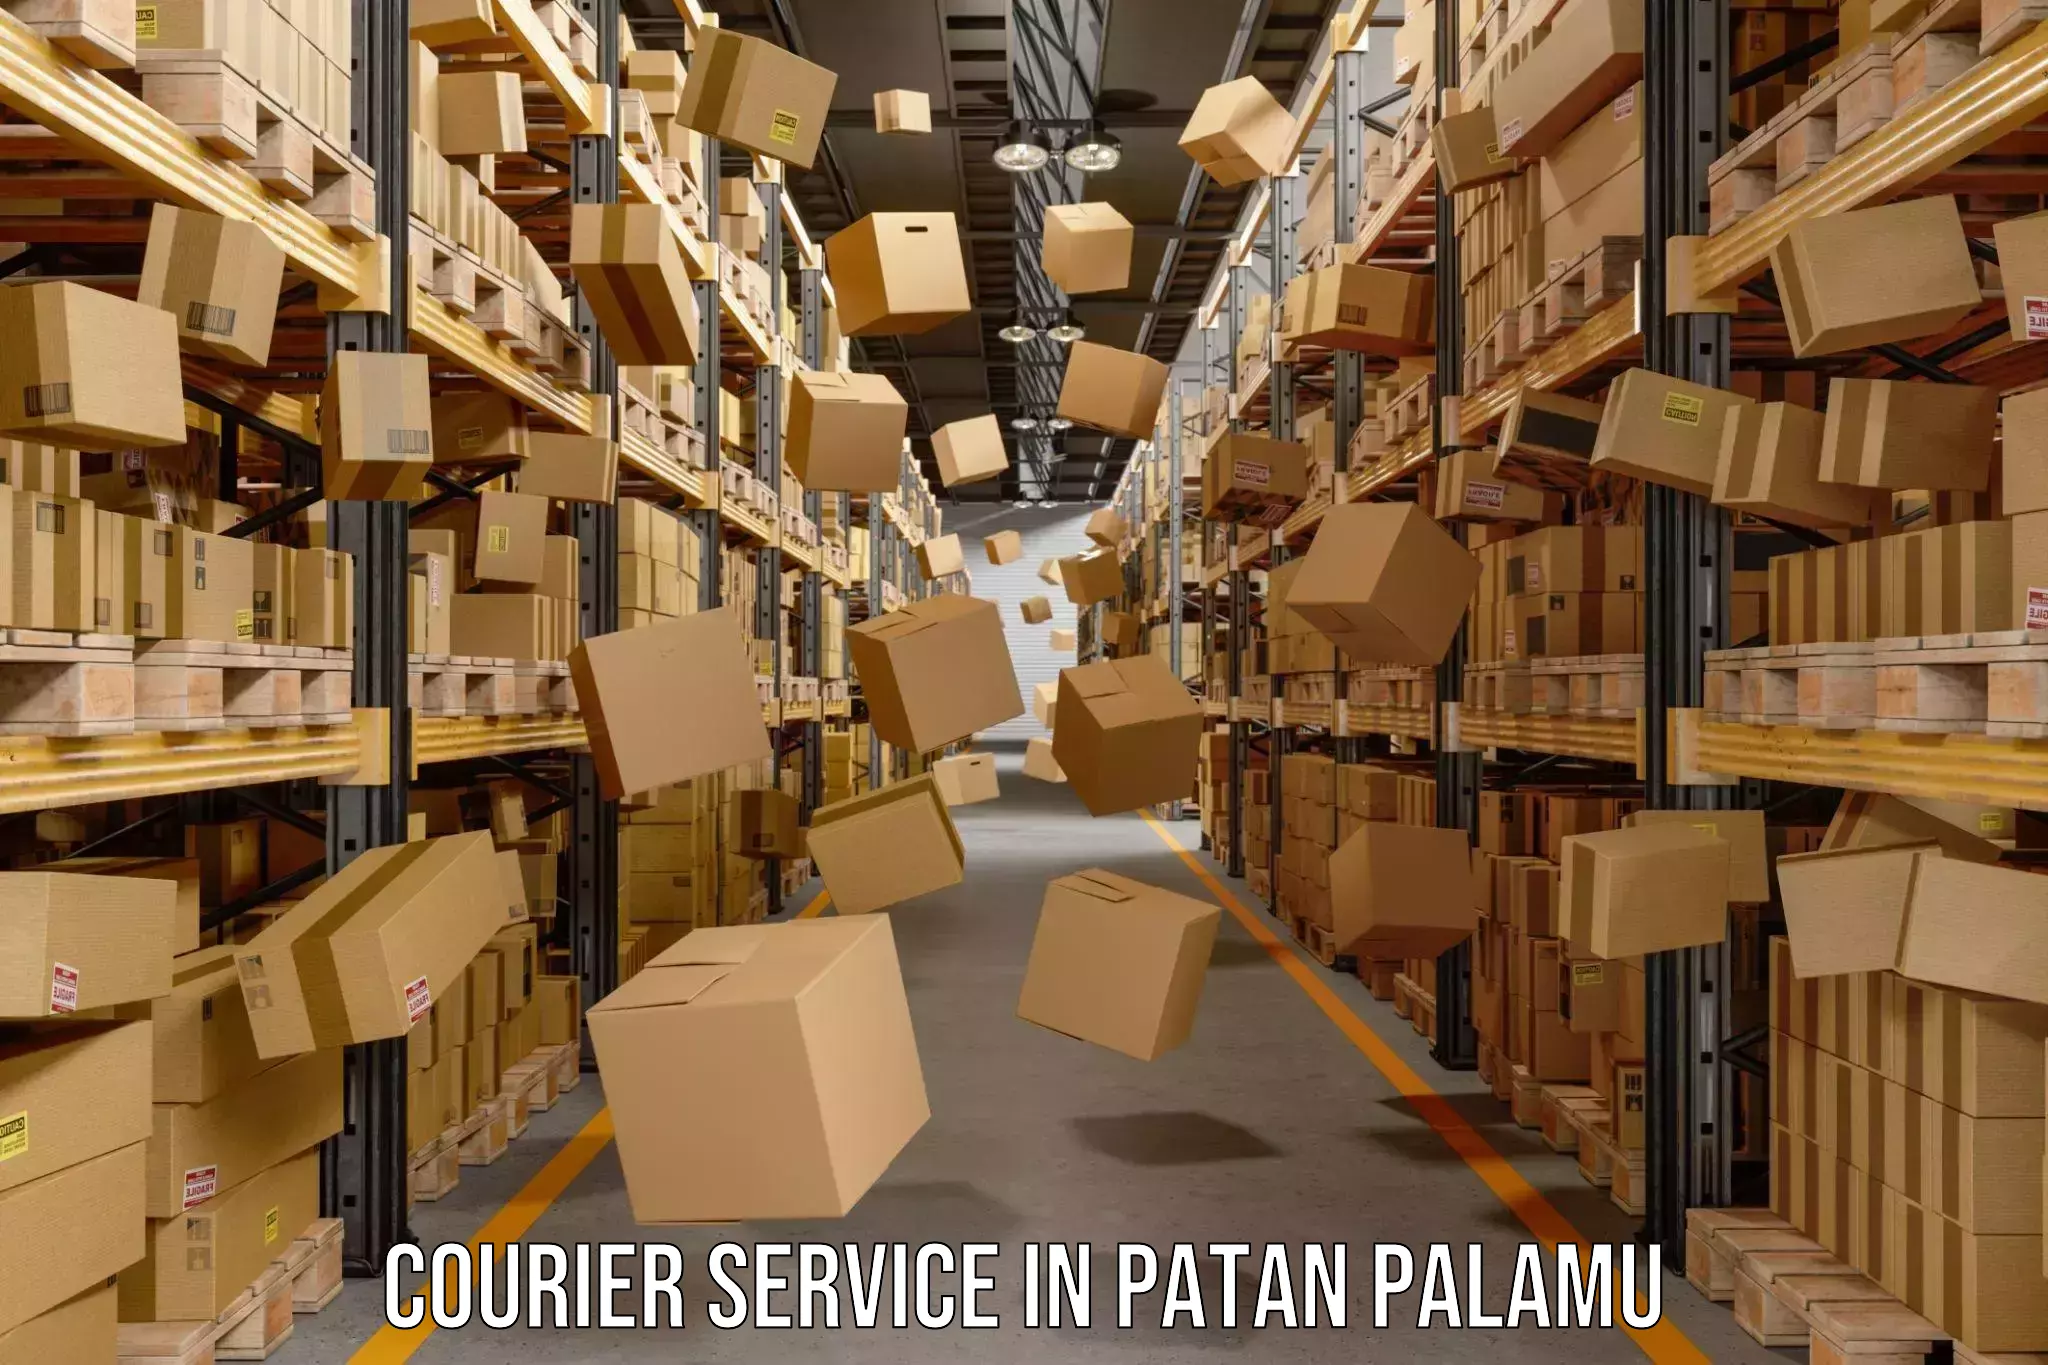 Flexible delivery scheduling in Patan Palamu